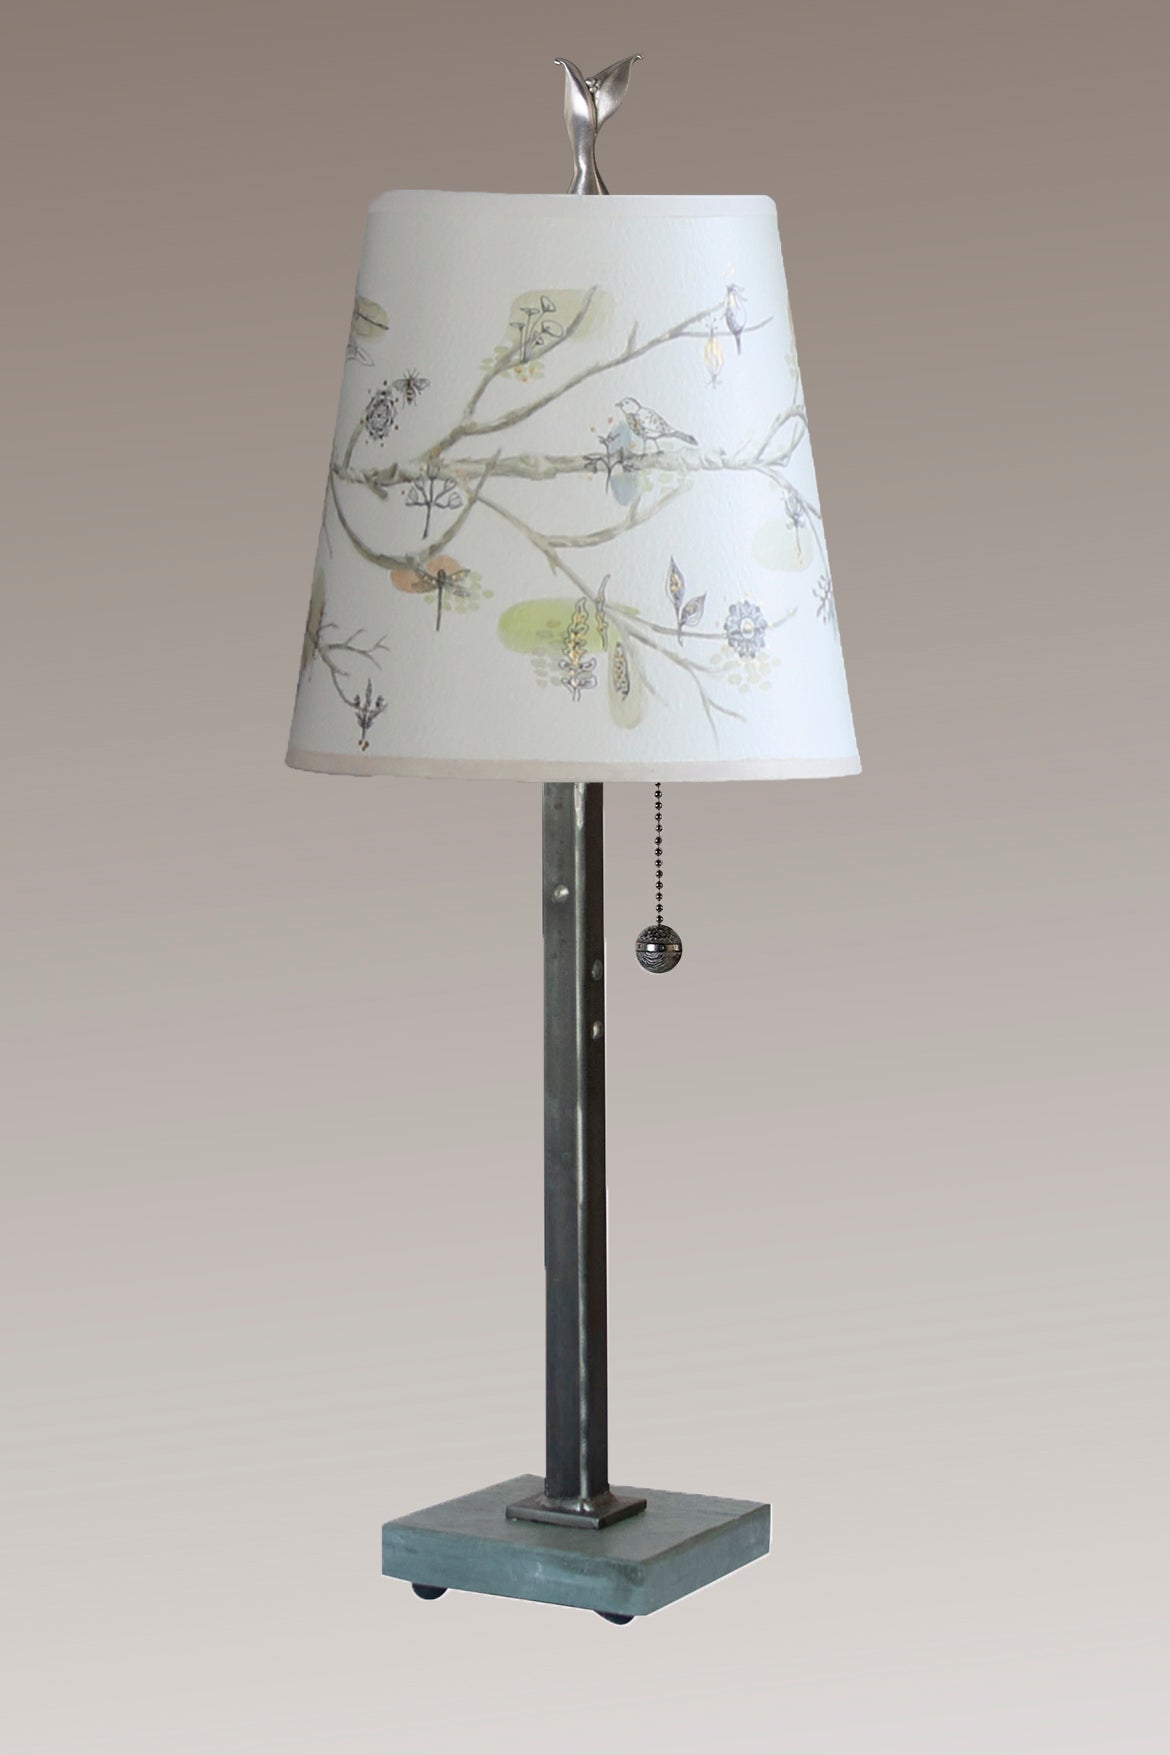 Janna Ugone & Co Table Lamps Steel Table Lamp with Small Drum Shade in Artful Branch